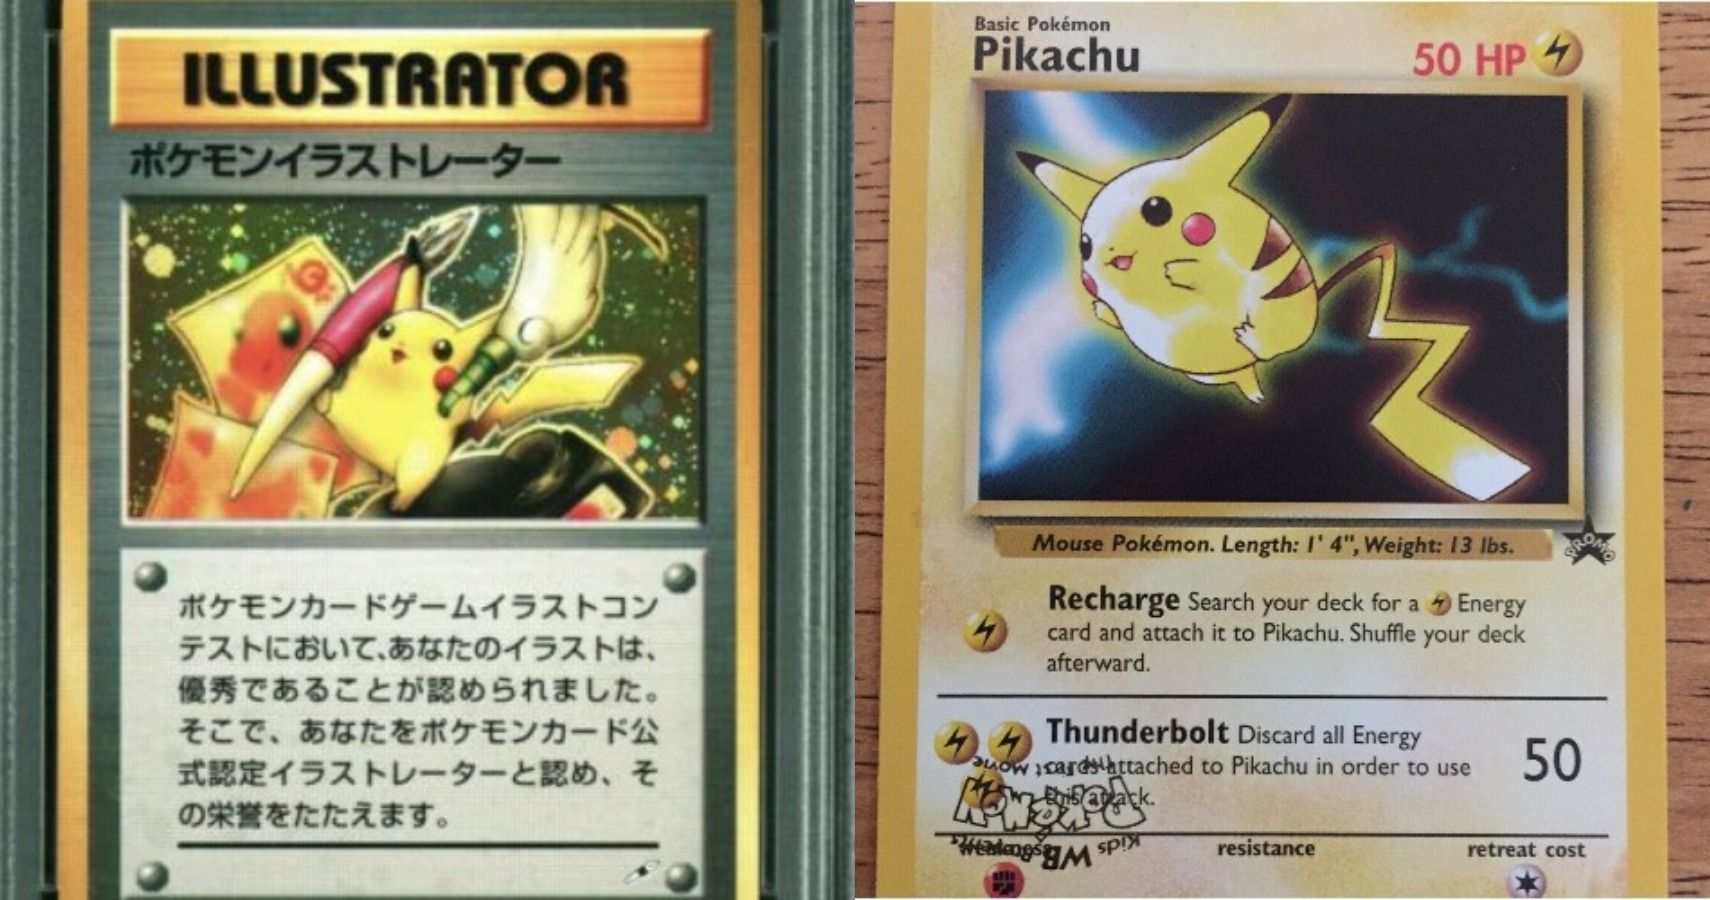 Pokémon: The 12 Most Valuable Pikachu Cards (& 12 That Aren't Worth Much)